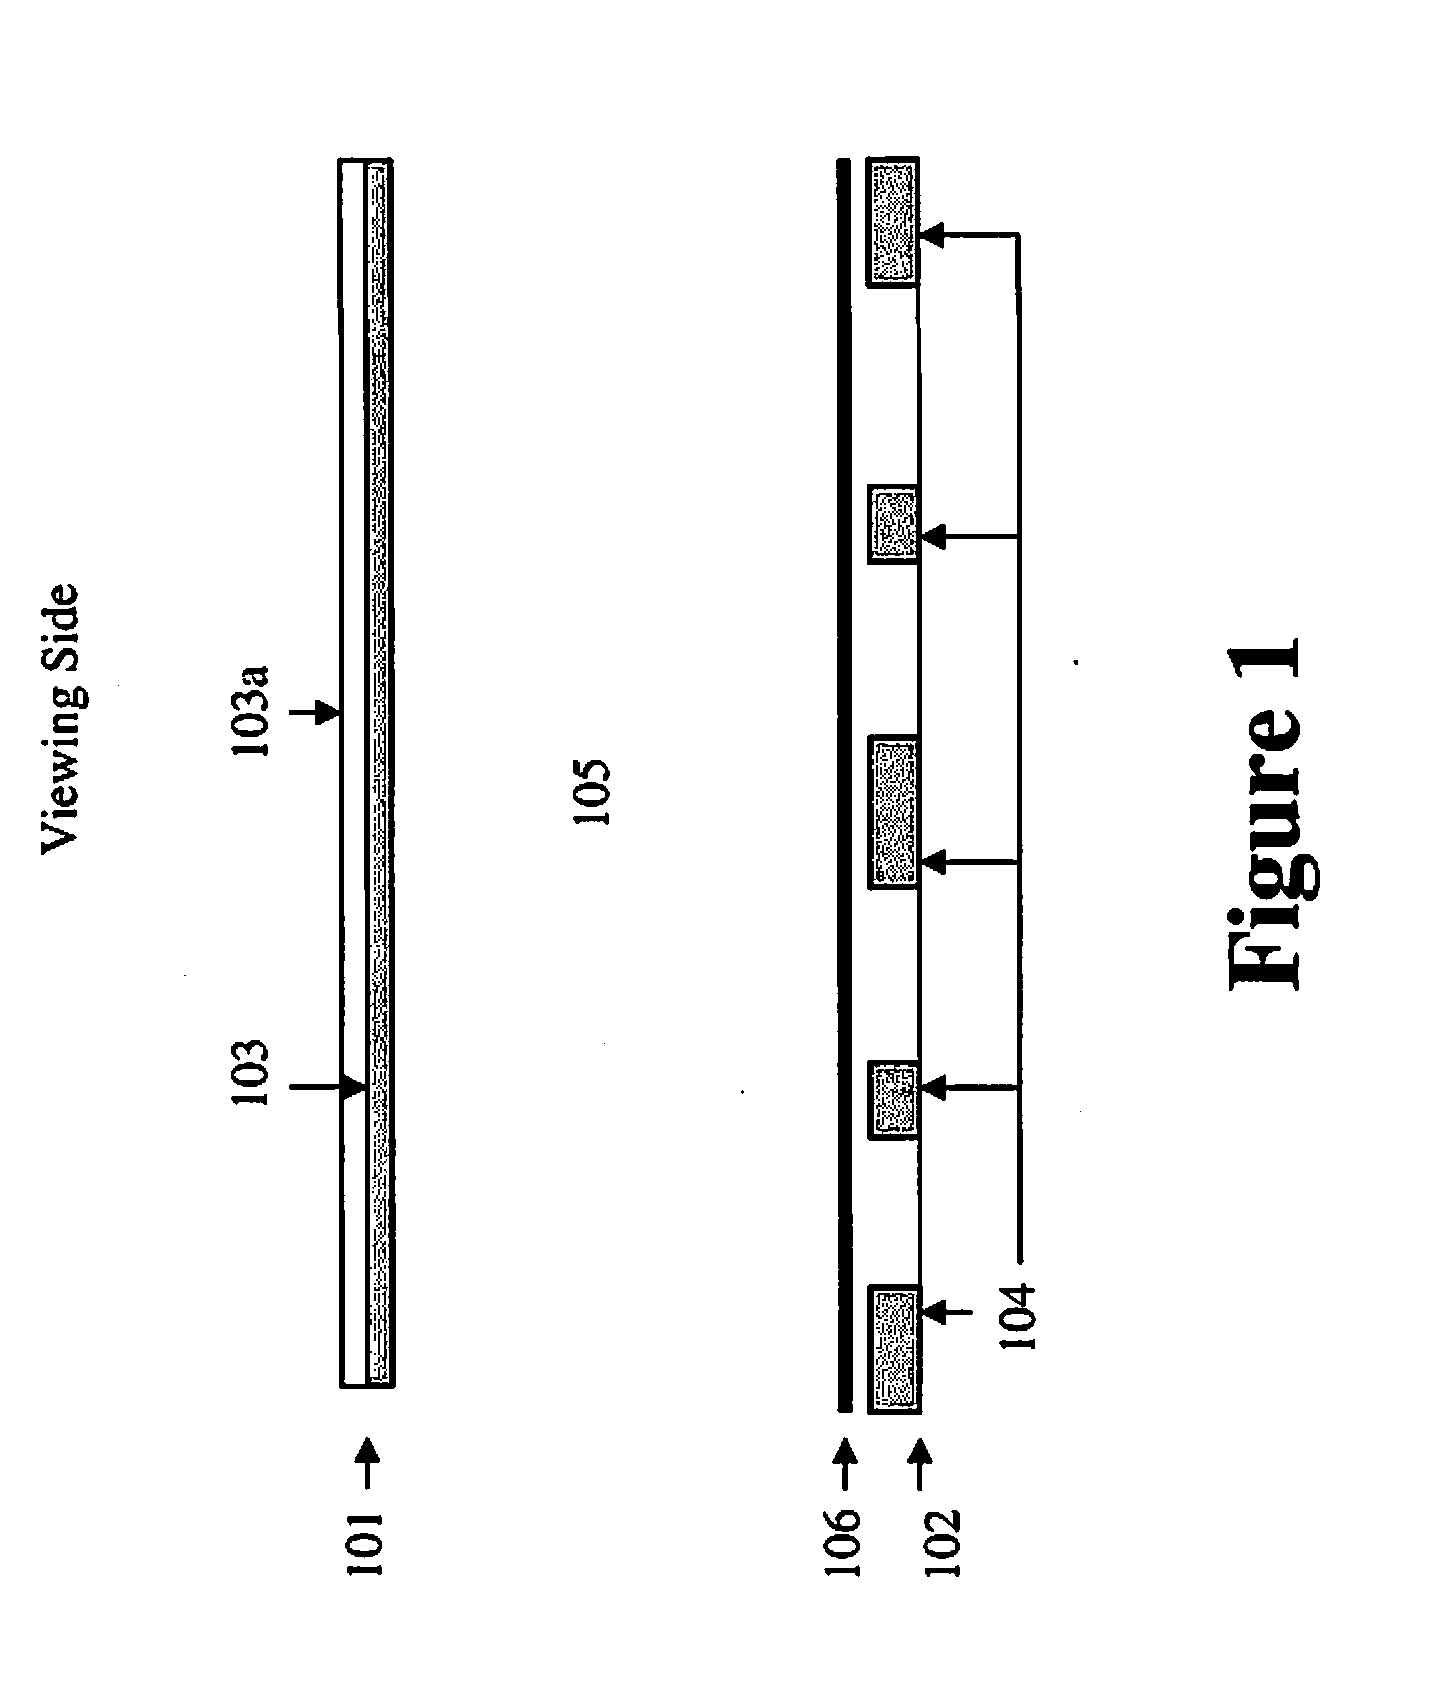 Shutter mode for color display devices